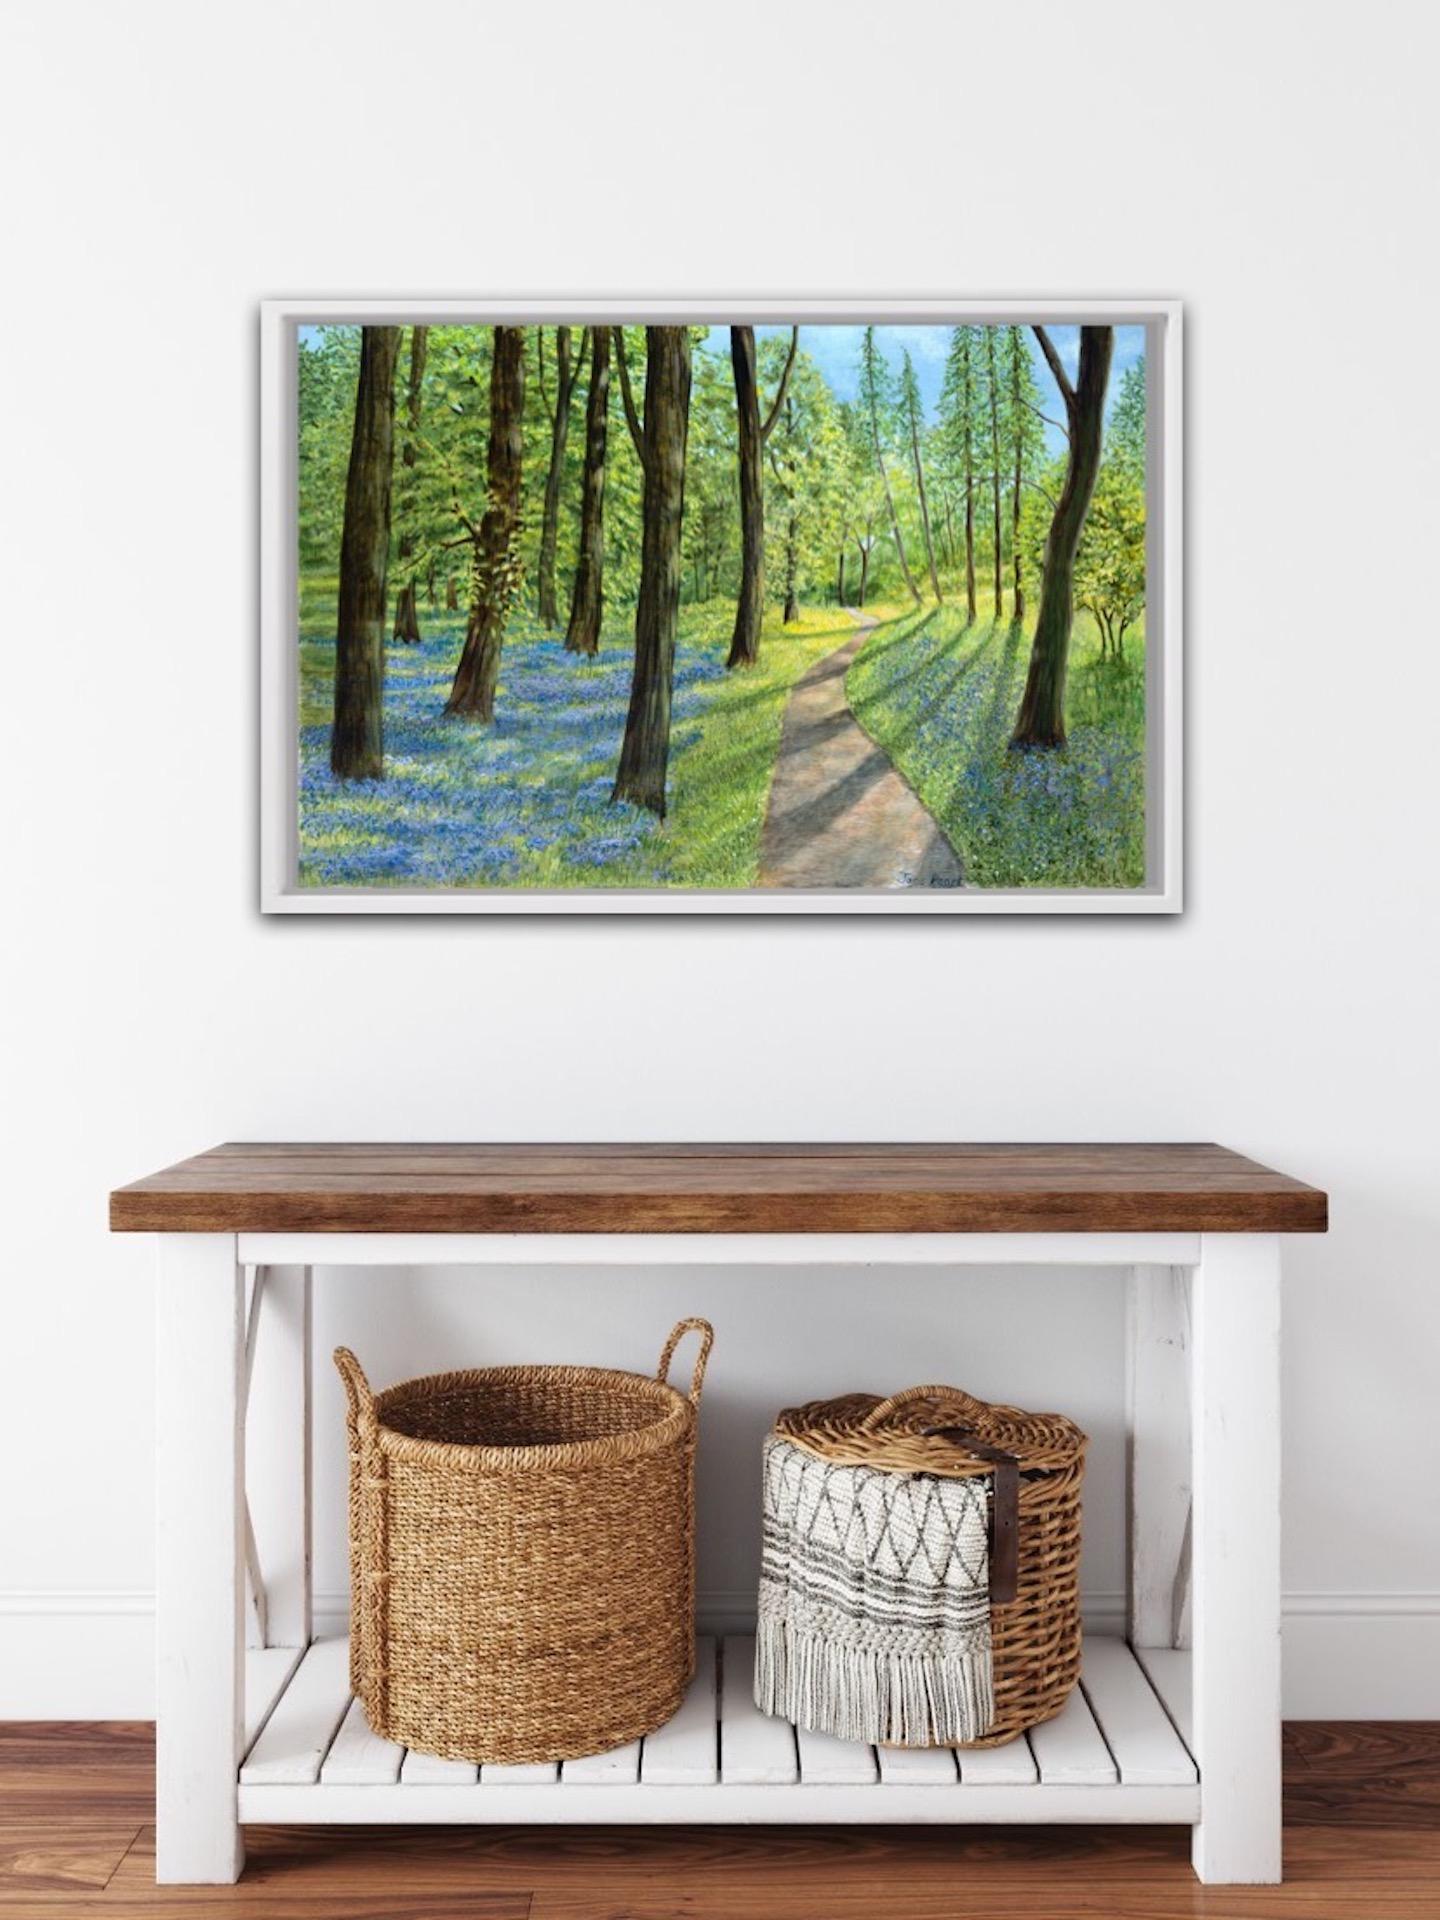 Jane Peart
Bluebell Woods
Original Painting
Acrylic on Canvas
Canvas size: H 51cm x W 76cm x D 2cm
sold unframed
(Please note that in situ images are purely an indication of how the piece may look).

Bluebell Woods is an original painting on canvas,